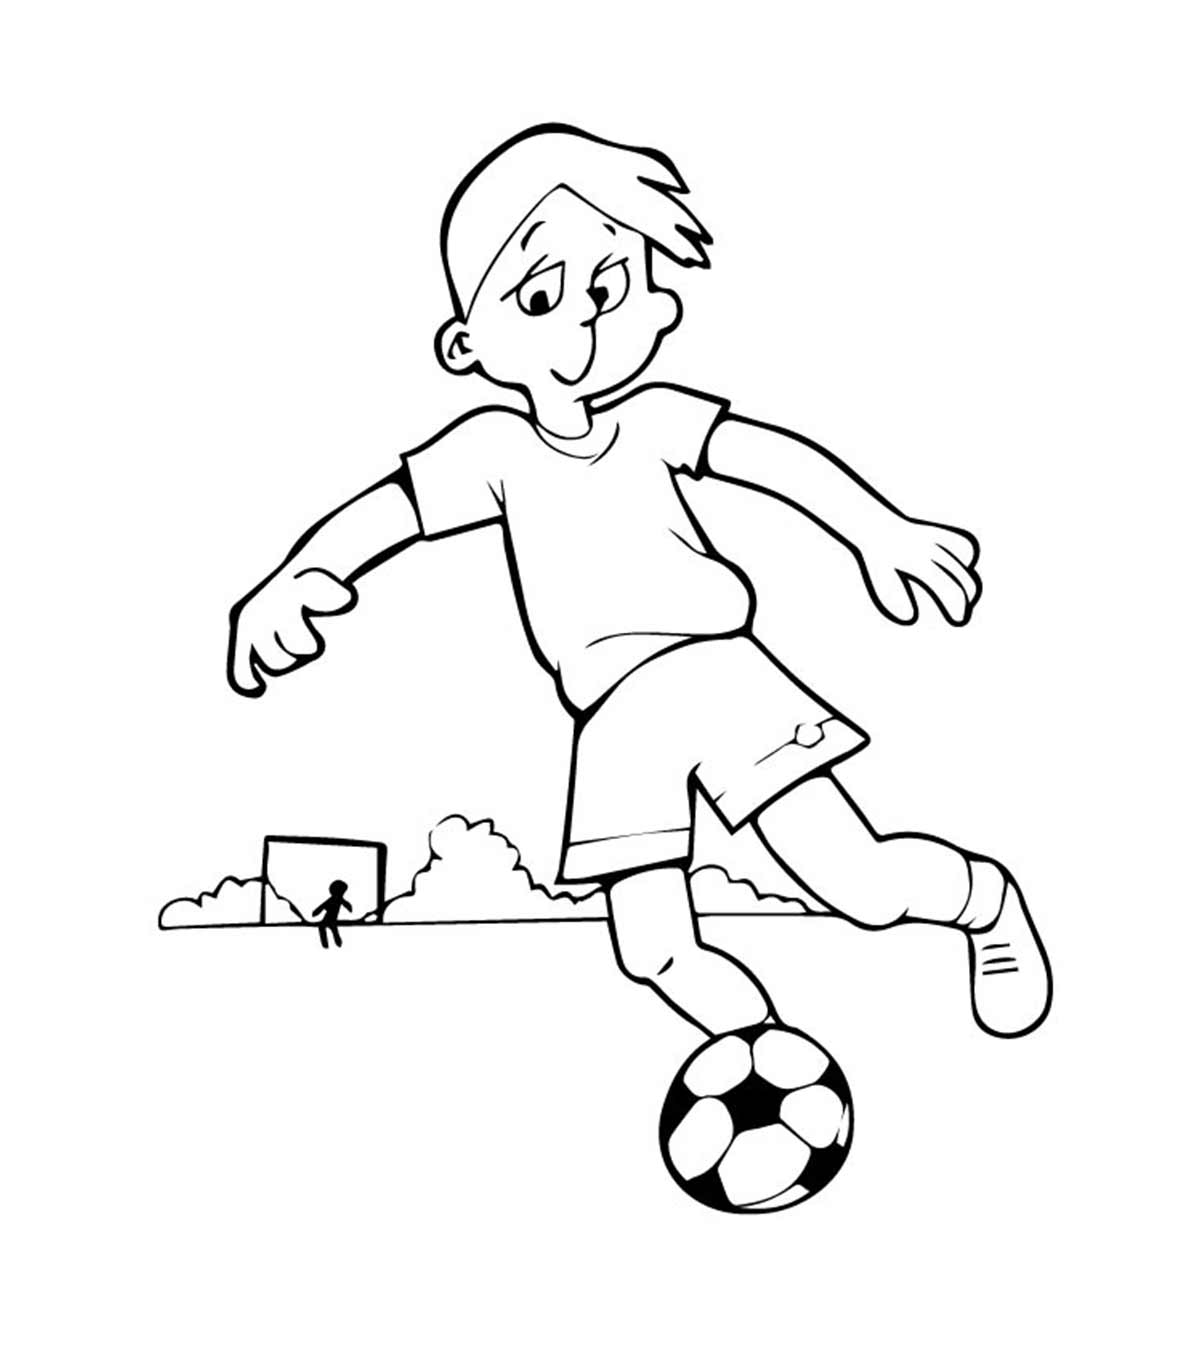 25 Popular Soccer Ball Coloring Pages For Soccer Loving Kids